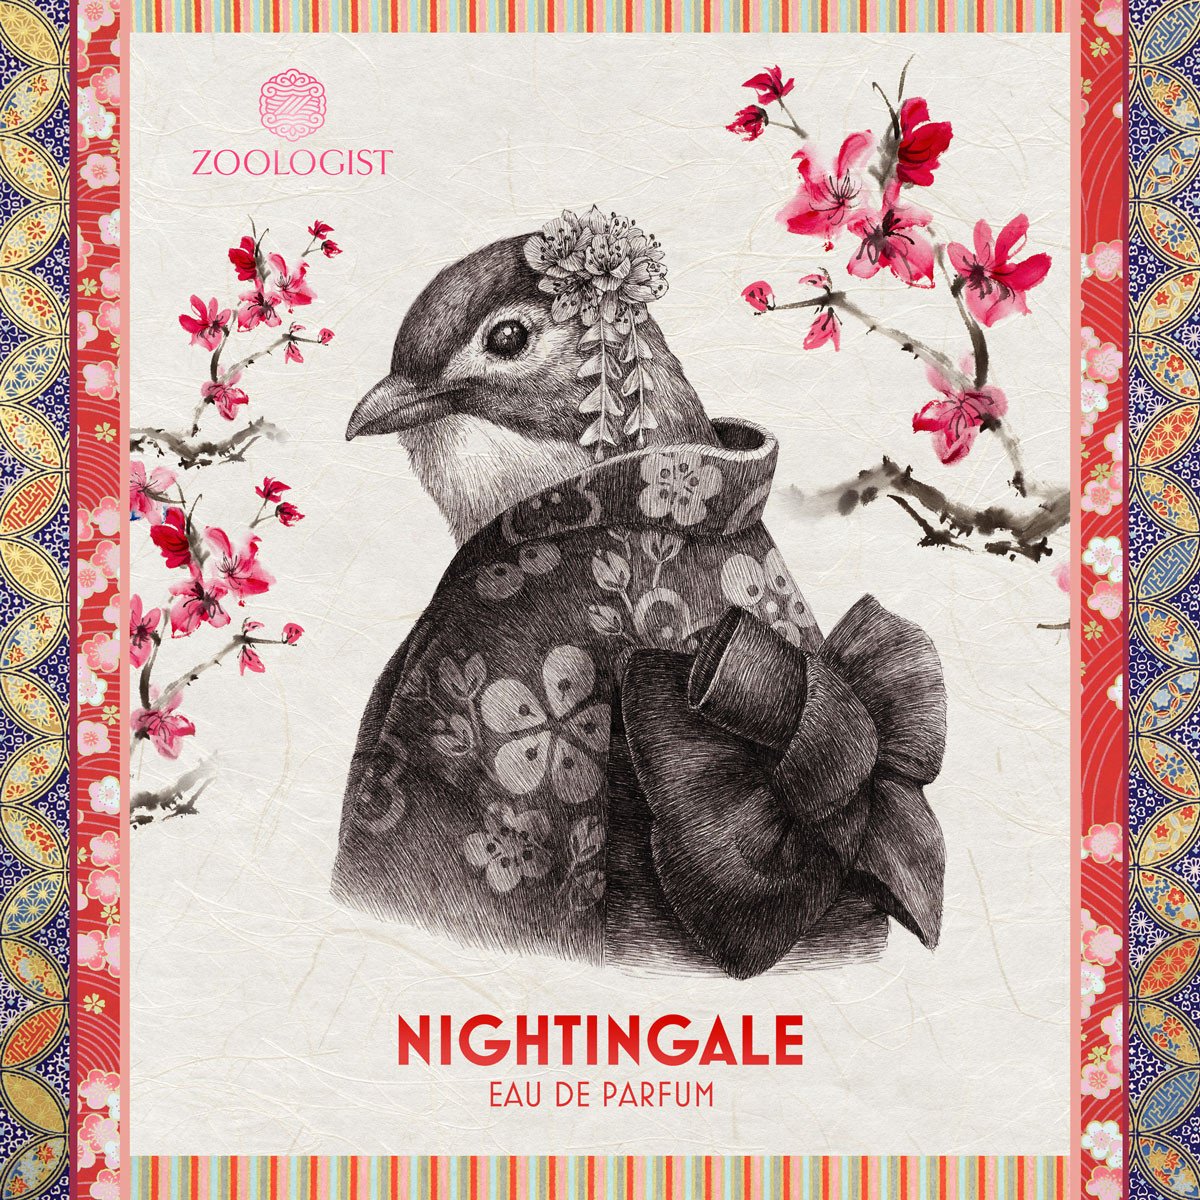 An Interview with Toomo Inaba, the perfumer of Zoologist's Nightingale